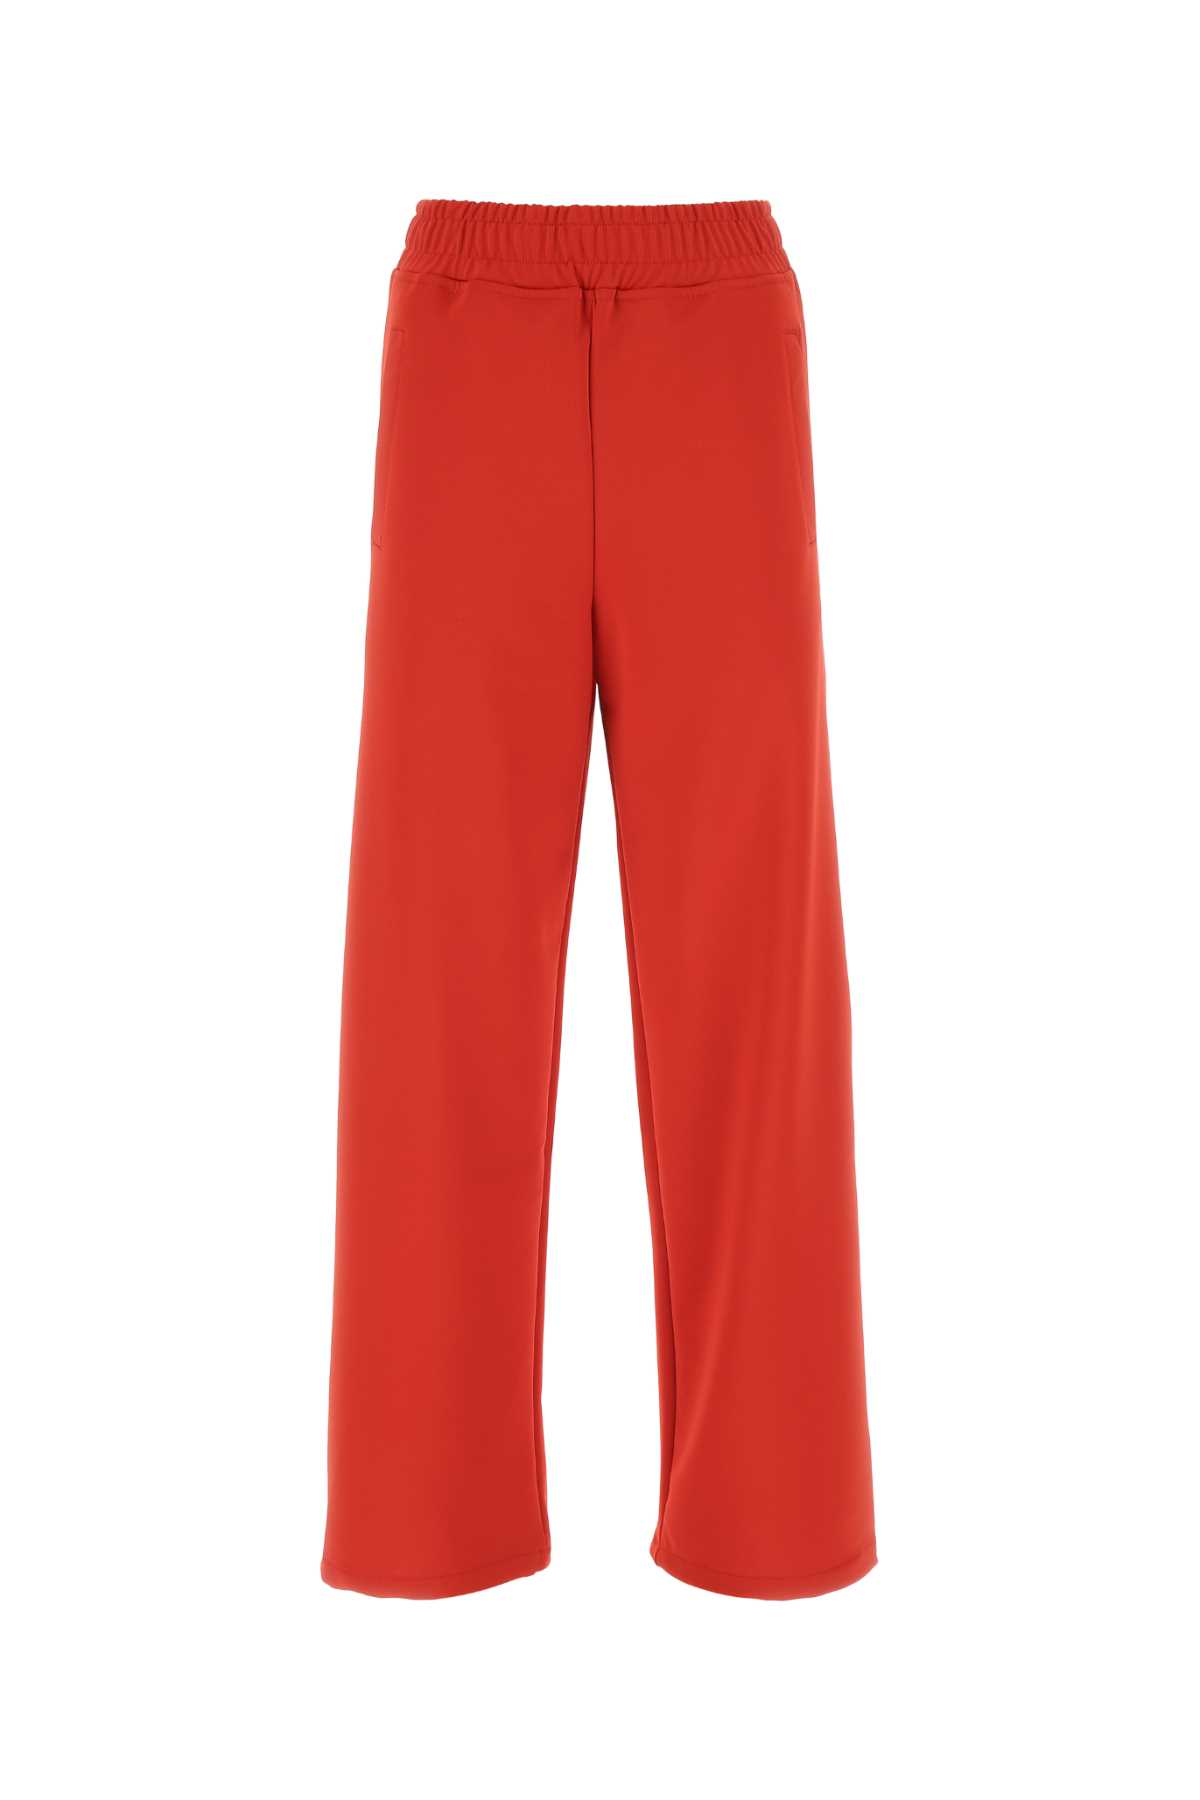 J.W. Anderson Red Stretch Polyester Pant